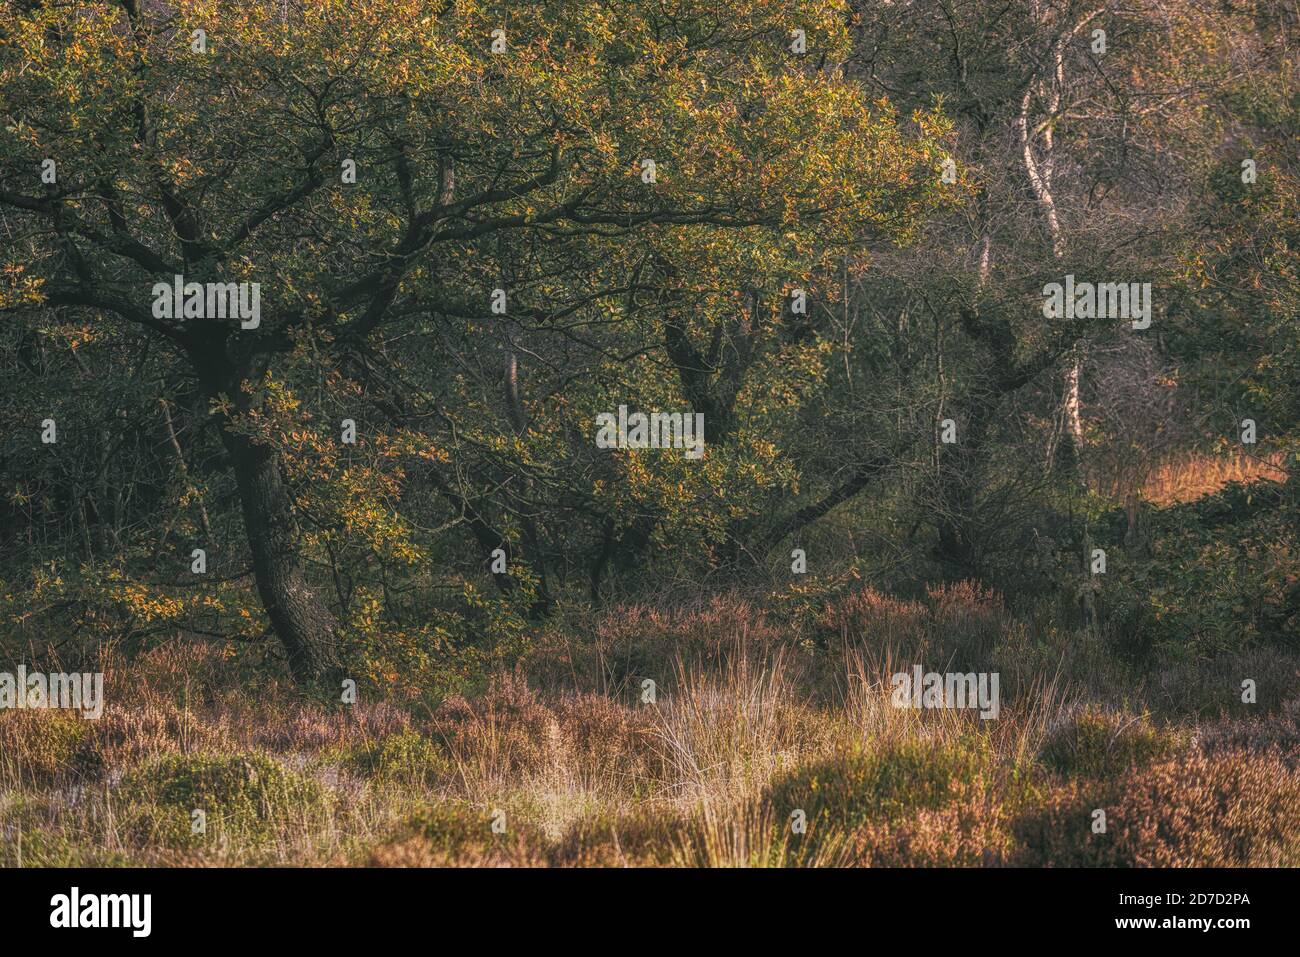 Swineholes wood. Vibrant autumnal moody, ethereal UK forest woodland trees, and foliage with a shallow depth of field. Stock Photo